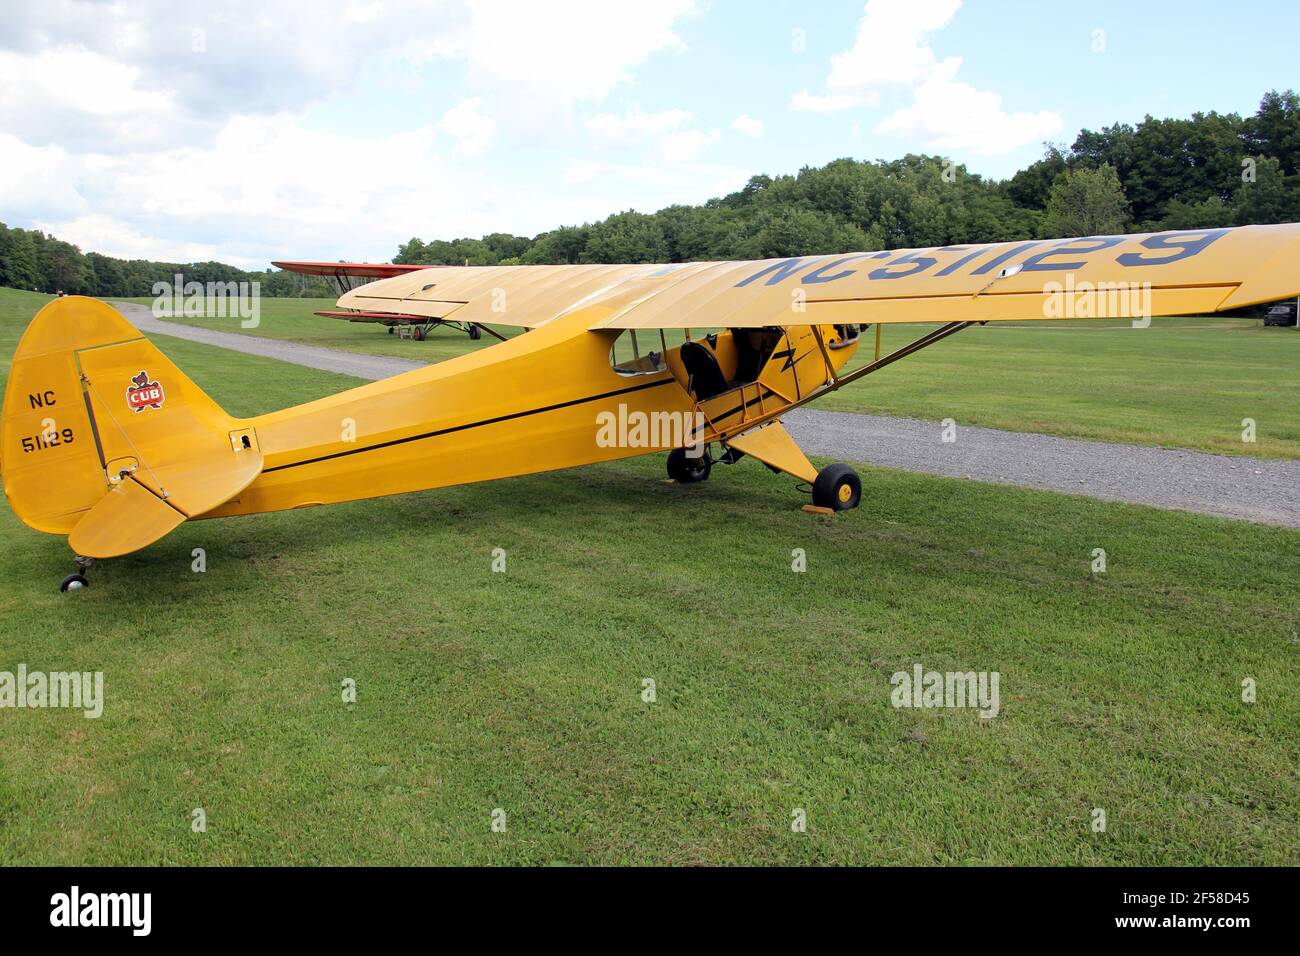 Vintage yellow airplane on the grass airfield of the Old Rhinebeck Aerodrome, living aviation museum, Rhinebeck, NY, USA Stock Photo